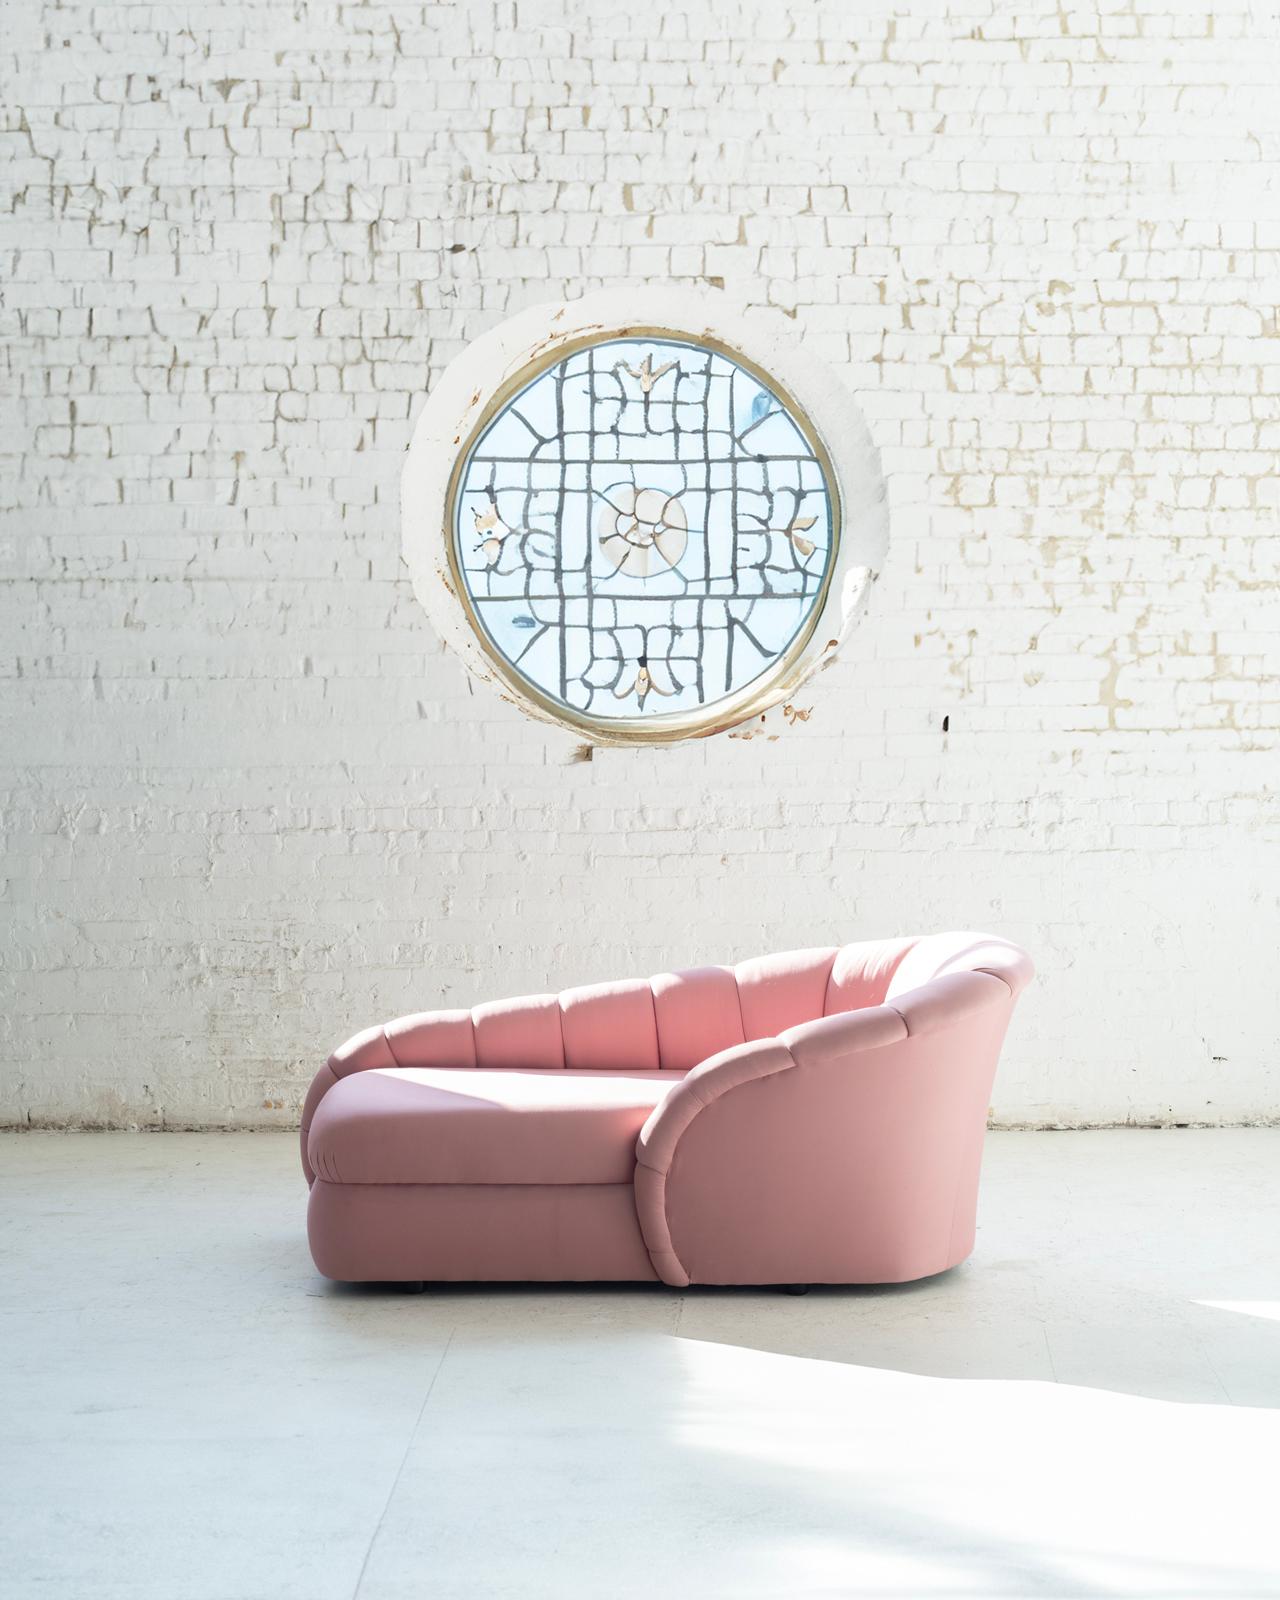 This Mauve Scalloped Chaise Lounge, is a masterpiece designed by Vladimir Kagan for Directional in the 1980s. It exudes timeless elegance and sophistication, showcasing Kagan's renowned craftsmanship and innovative design.

The chaise lounge